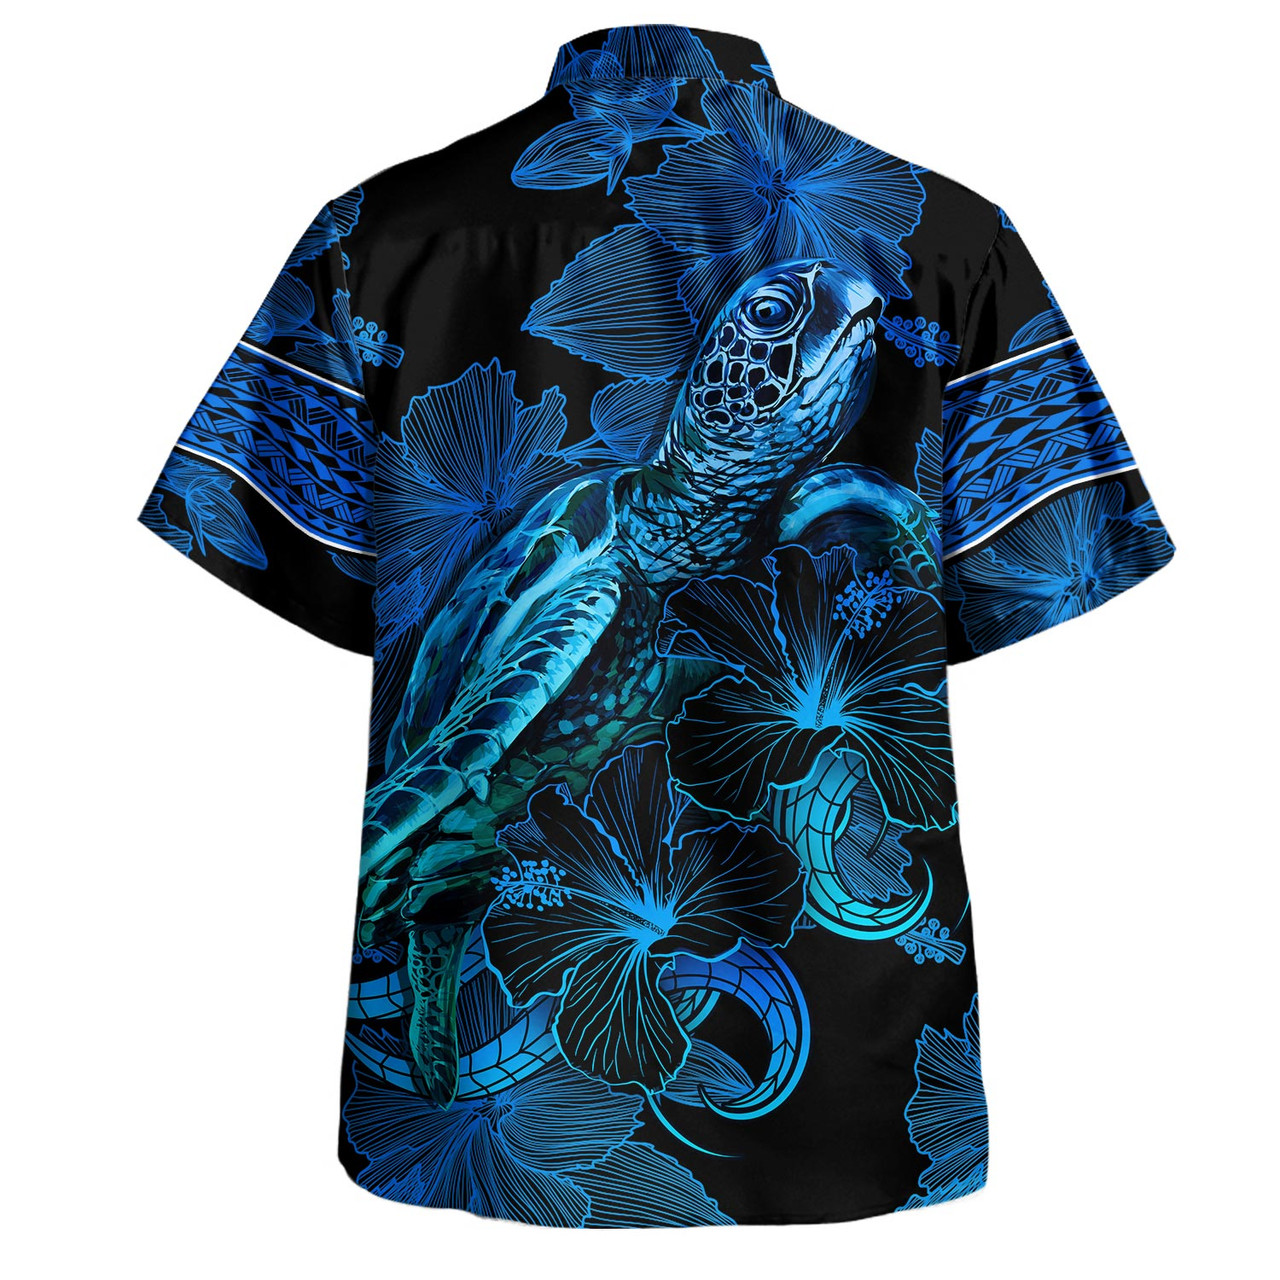 New Zealand Combo Puletasi And Shirt Sea Turtle With Blooming Hibiscus Flowers Tribal Blue